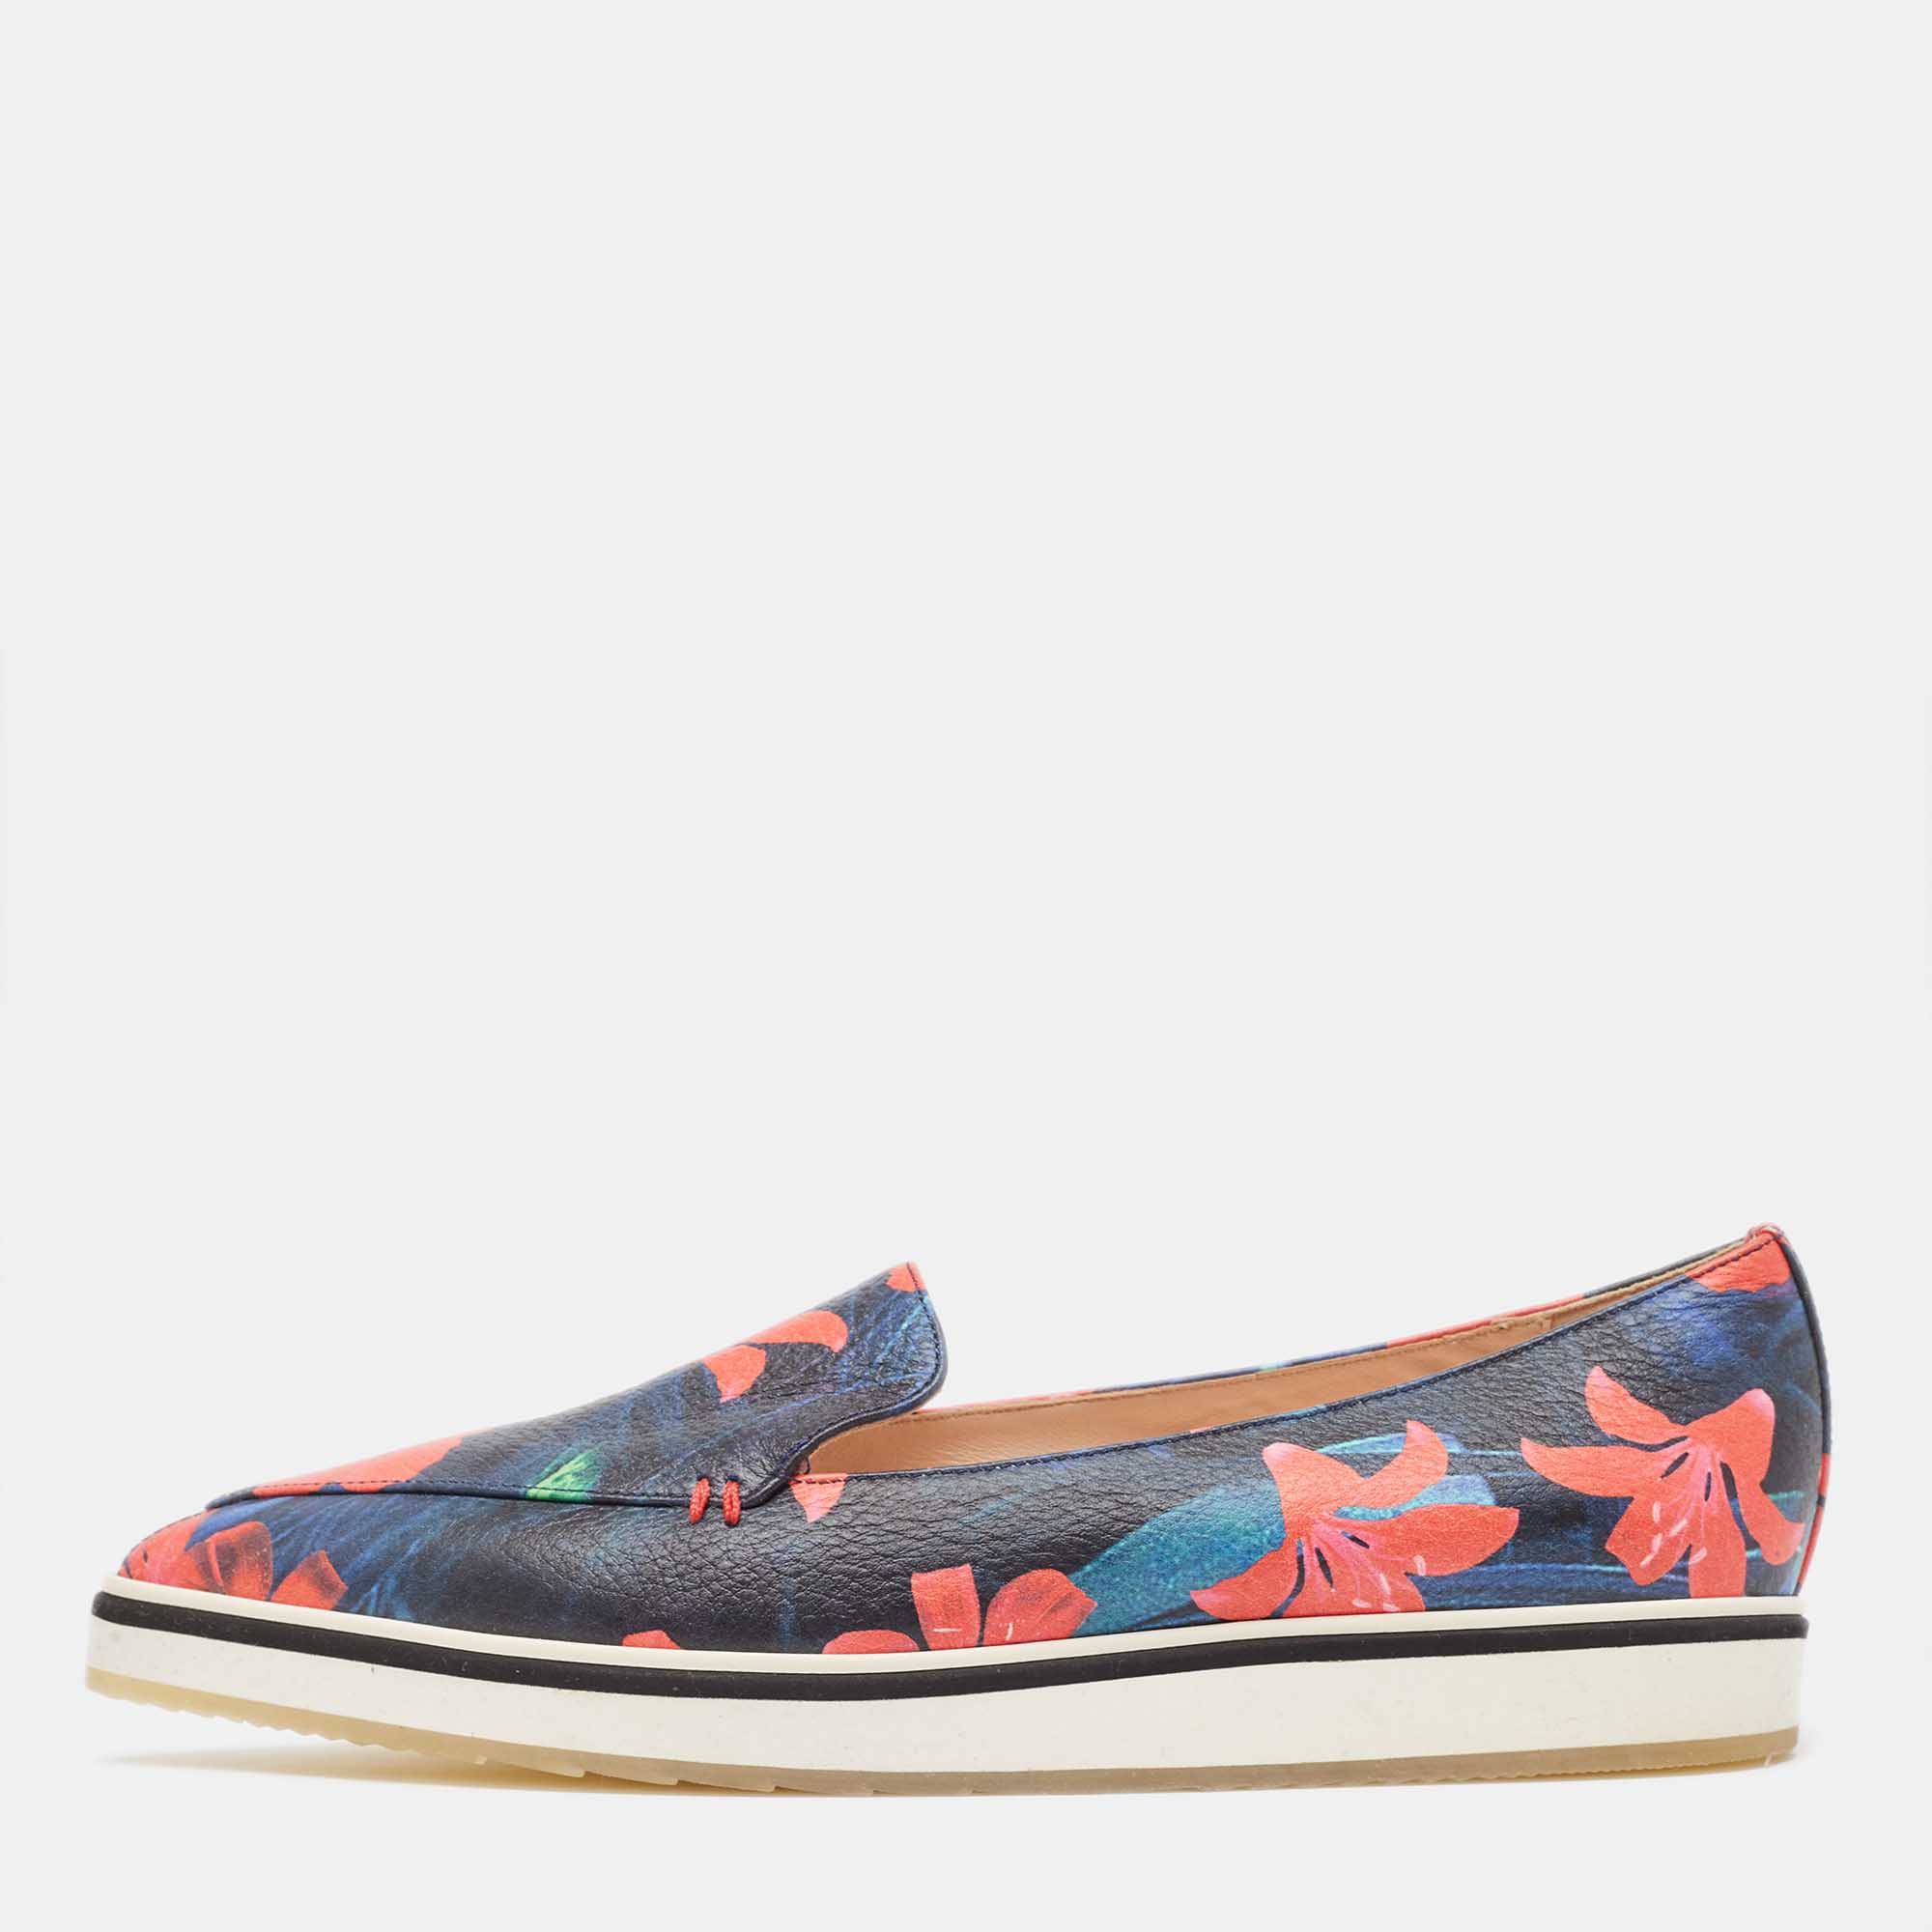 Pre-owned Nicholas Kirkwood Multicolor Floral Print Leather Alona Smoking Slipper Size 37